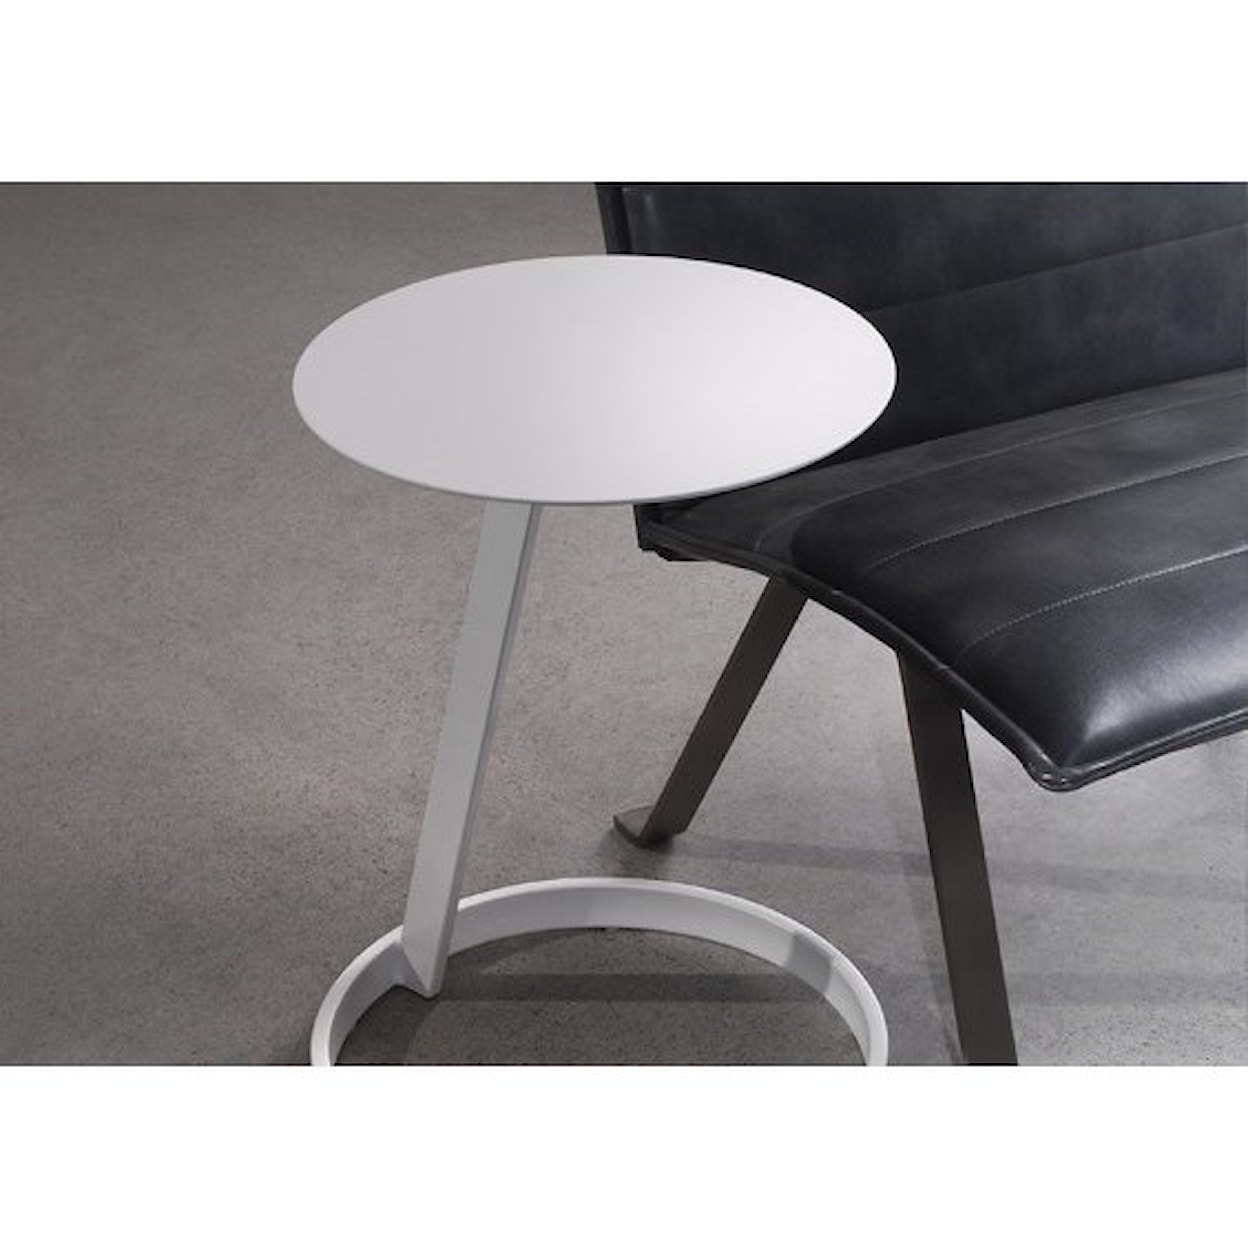 Trica Aroma Chairside Table